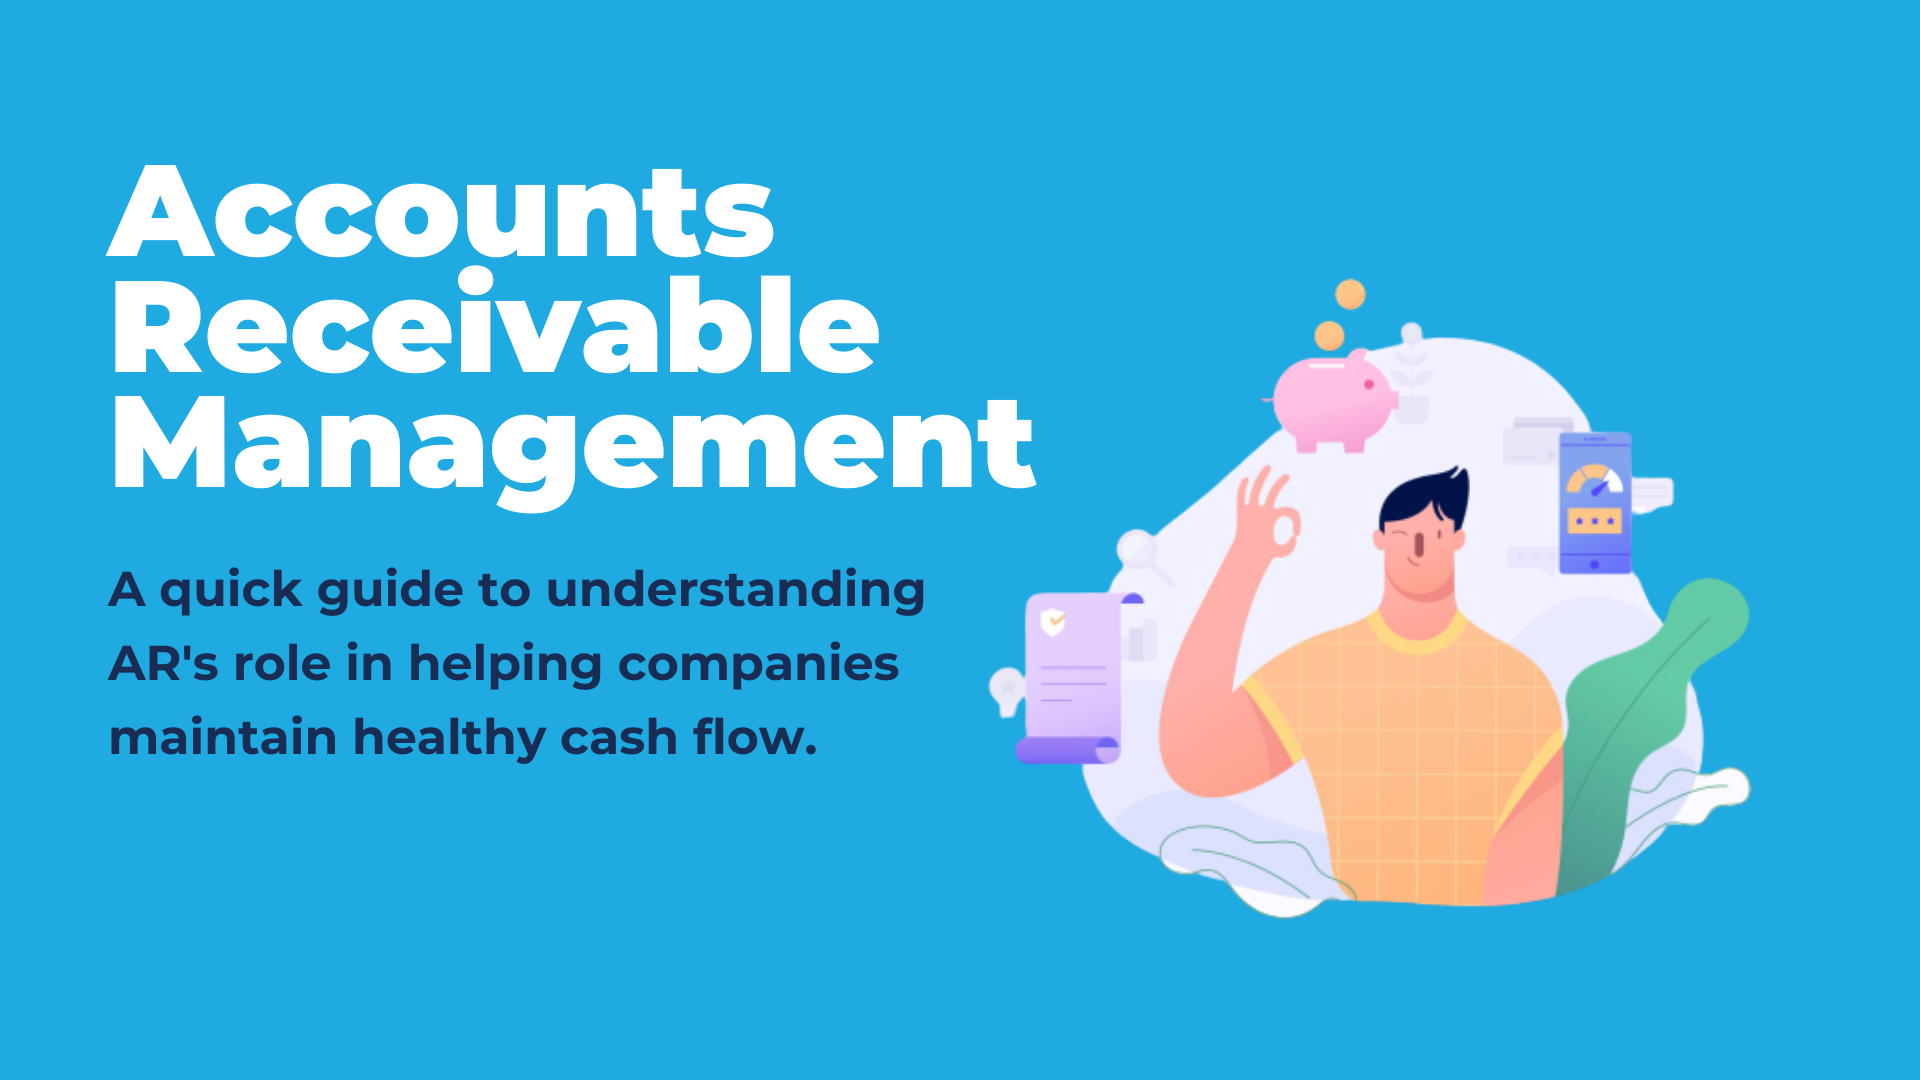 A Quick Guide to Understanding Accounts Receivable Management